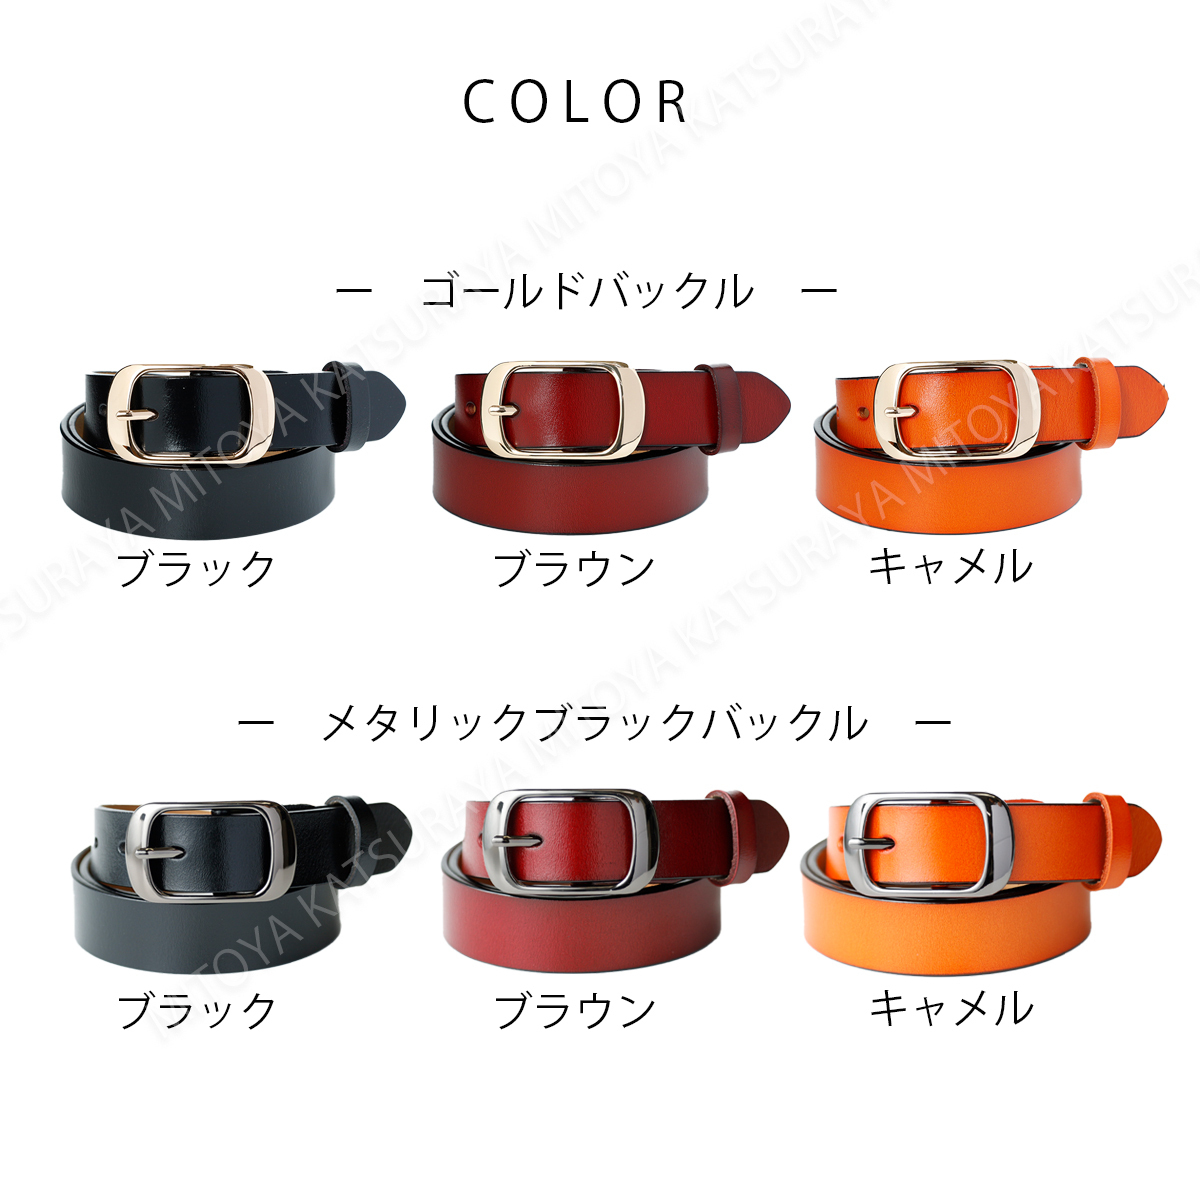  original leather lady's belt * dark brown + Gold buckle * cow leather leather casual simple Smart business Golf suit futoshi .